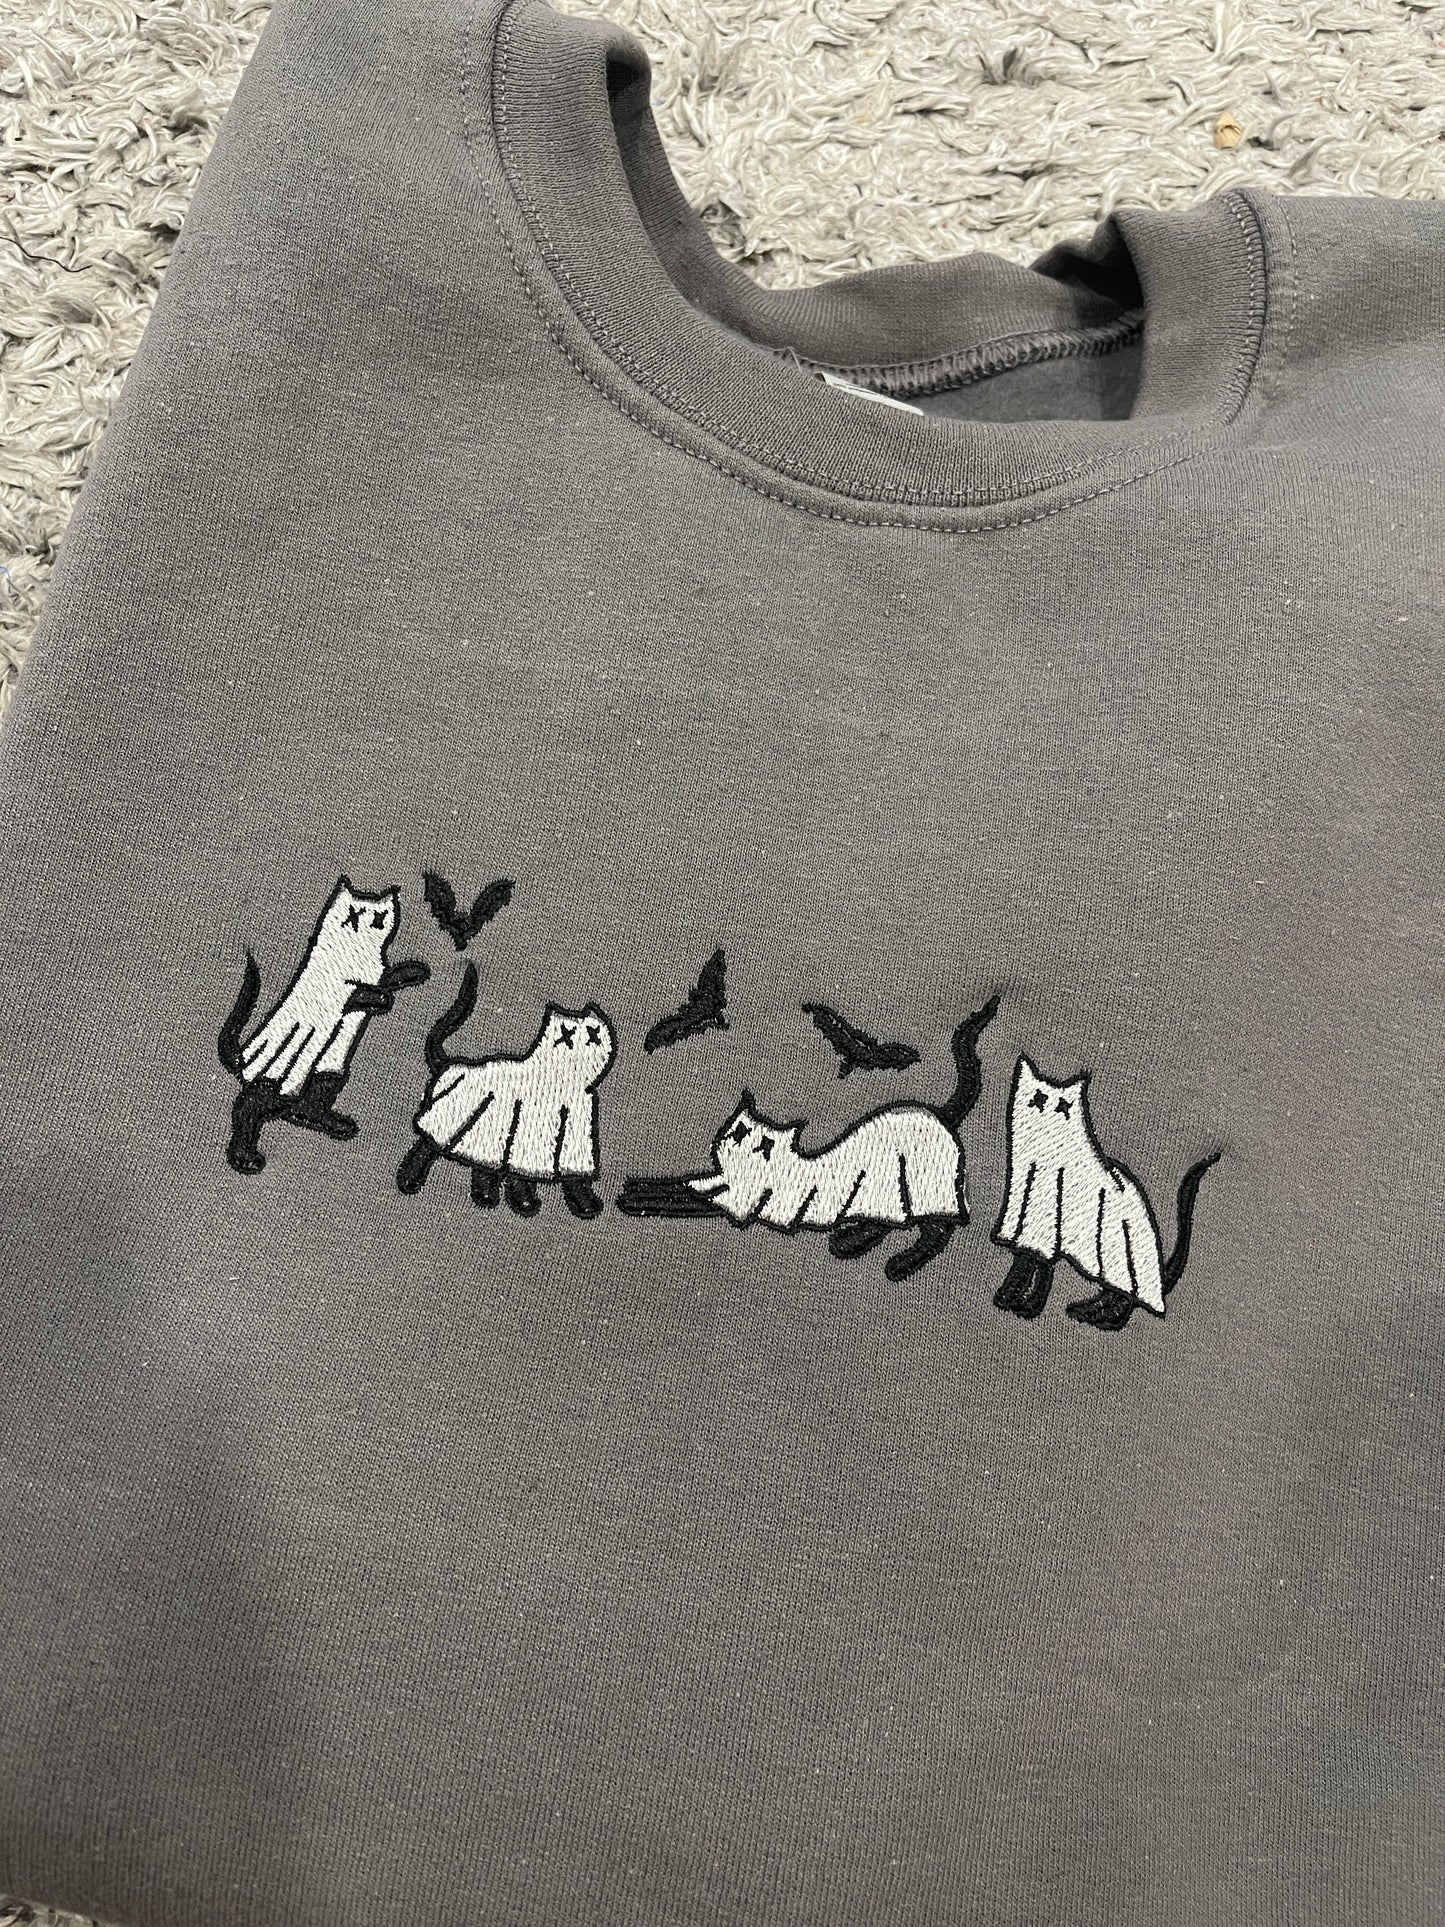 Black Ghost Cats with Bats Embroidery